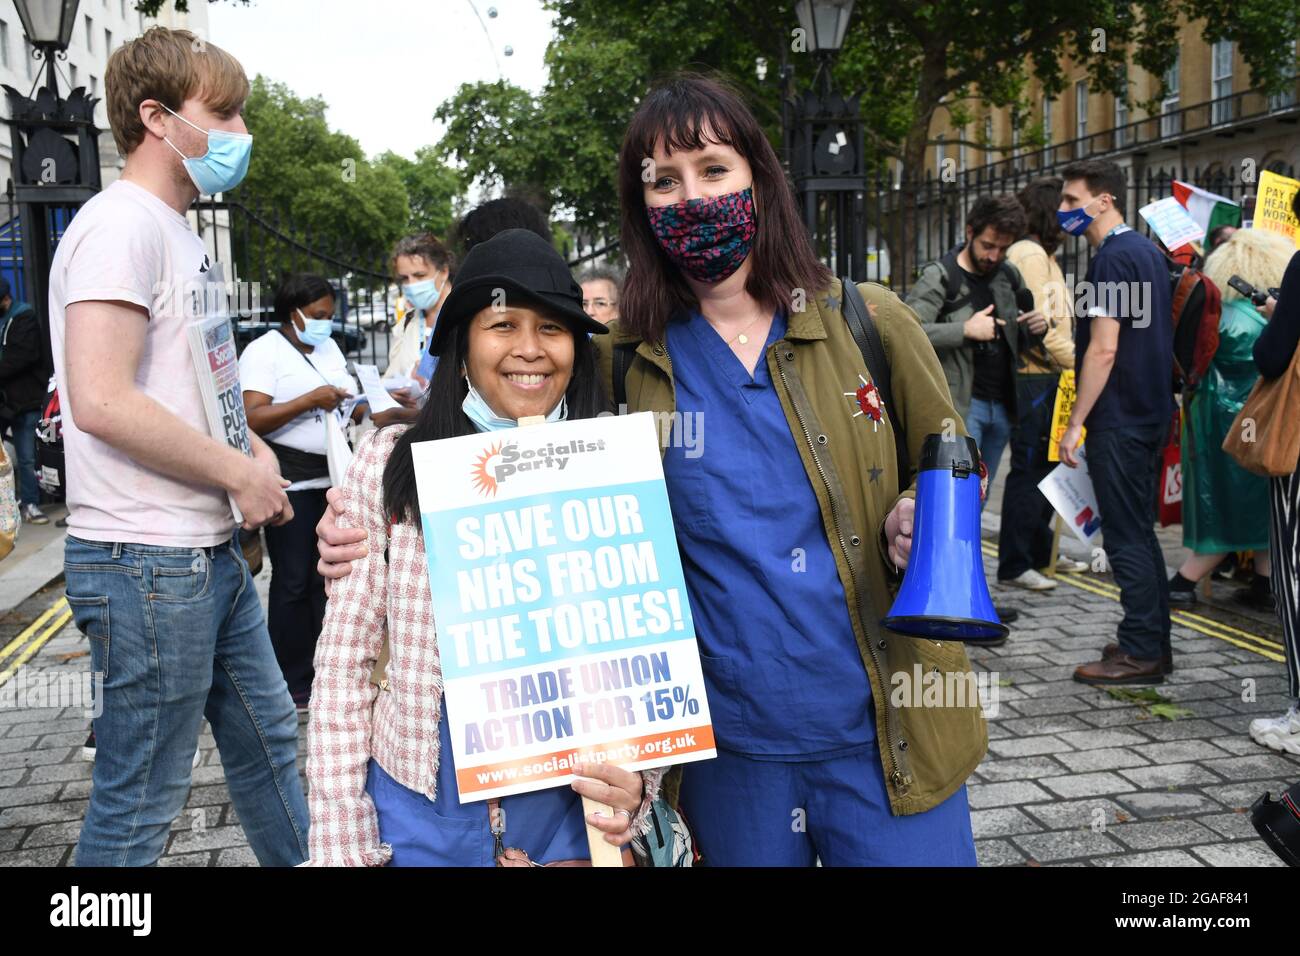 London, UK. 30th July, 2021. Doctors and nurses assembly at St Thomas' hospital for a march to Downing St demanding a proper pay rise for NHS workers, protest against the insulting 3% pay increase to NHS staff on 30 July 2021, London, UK. Credit: Picture Capital/Alamy Live News Stock Photo